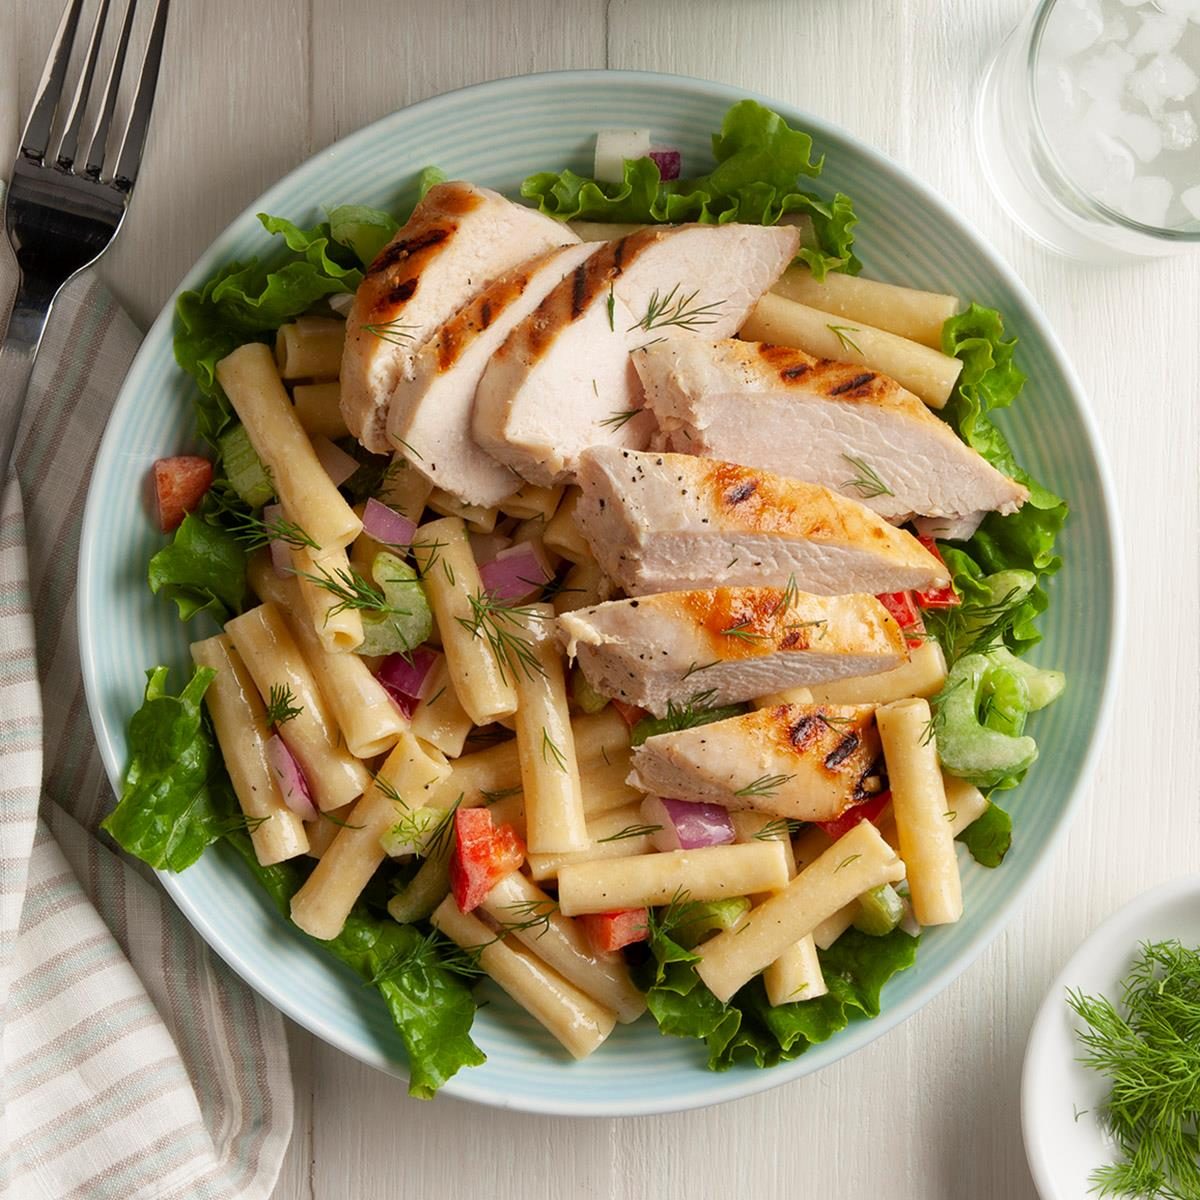 Grilled Chicken Salad Recipe: How to Make It